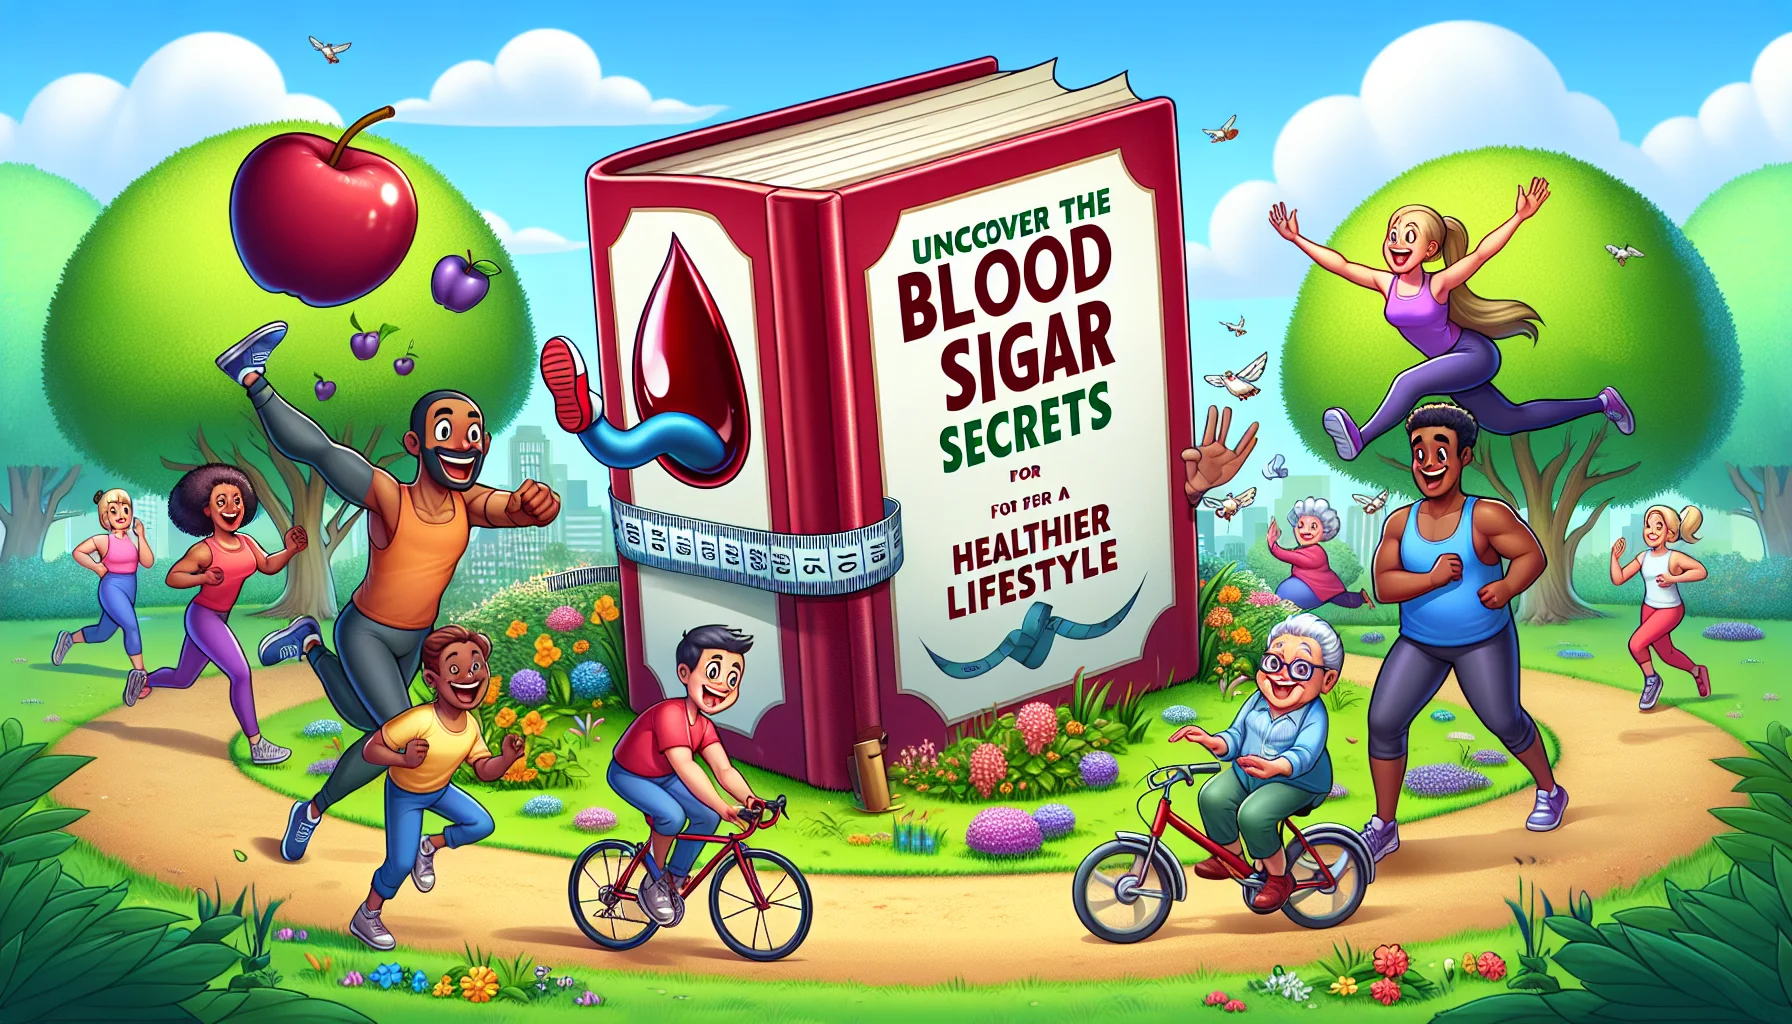 Craft an image illustrating a humorous scenario in which an amusing, cartoonish book titled 'Uncover the Blood Sugar Secrets for a Healthier Lifestyle' is being presented. This giant, eye-catching book is cherished by energetic individuals who are engaged in different enjoyable physical activities like jogging, dancing, yoga, and cycling around it. Showcase a diverse range of people in the scene: a mid-aged Middle Eastern man happily cycling, a Black woman in her 30s joyfully doing yoga, a Caucasian elderly woman energetically dancing, and a South Asian young man amusingly jogging. The backdrop is a lively park setting filled with blooming flowers, lush green lawns, and trees.